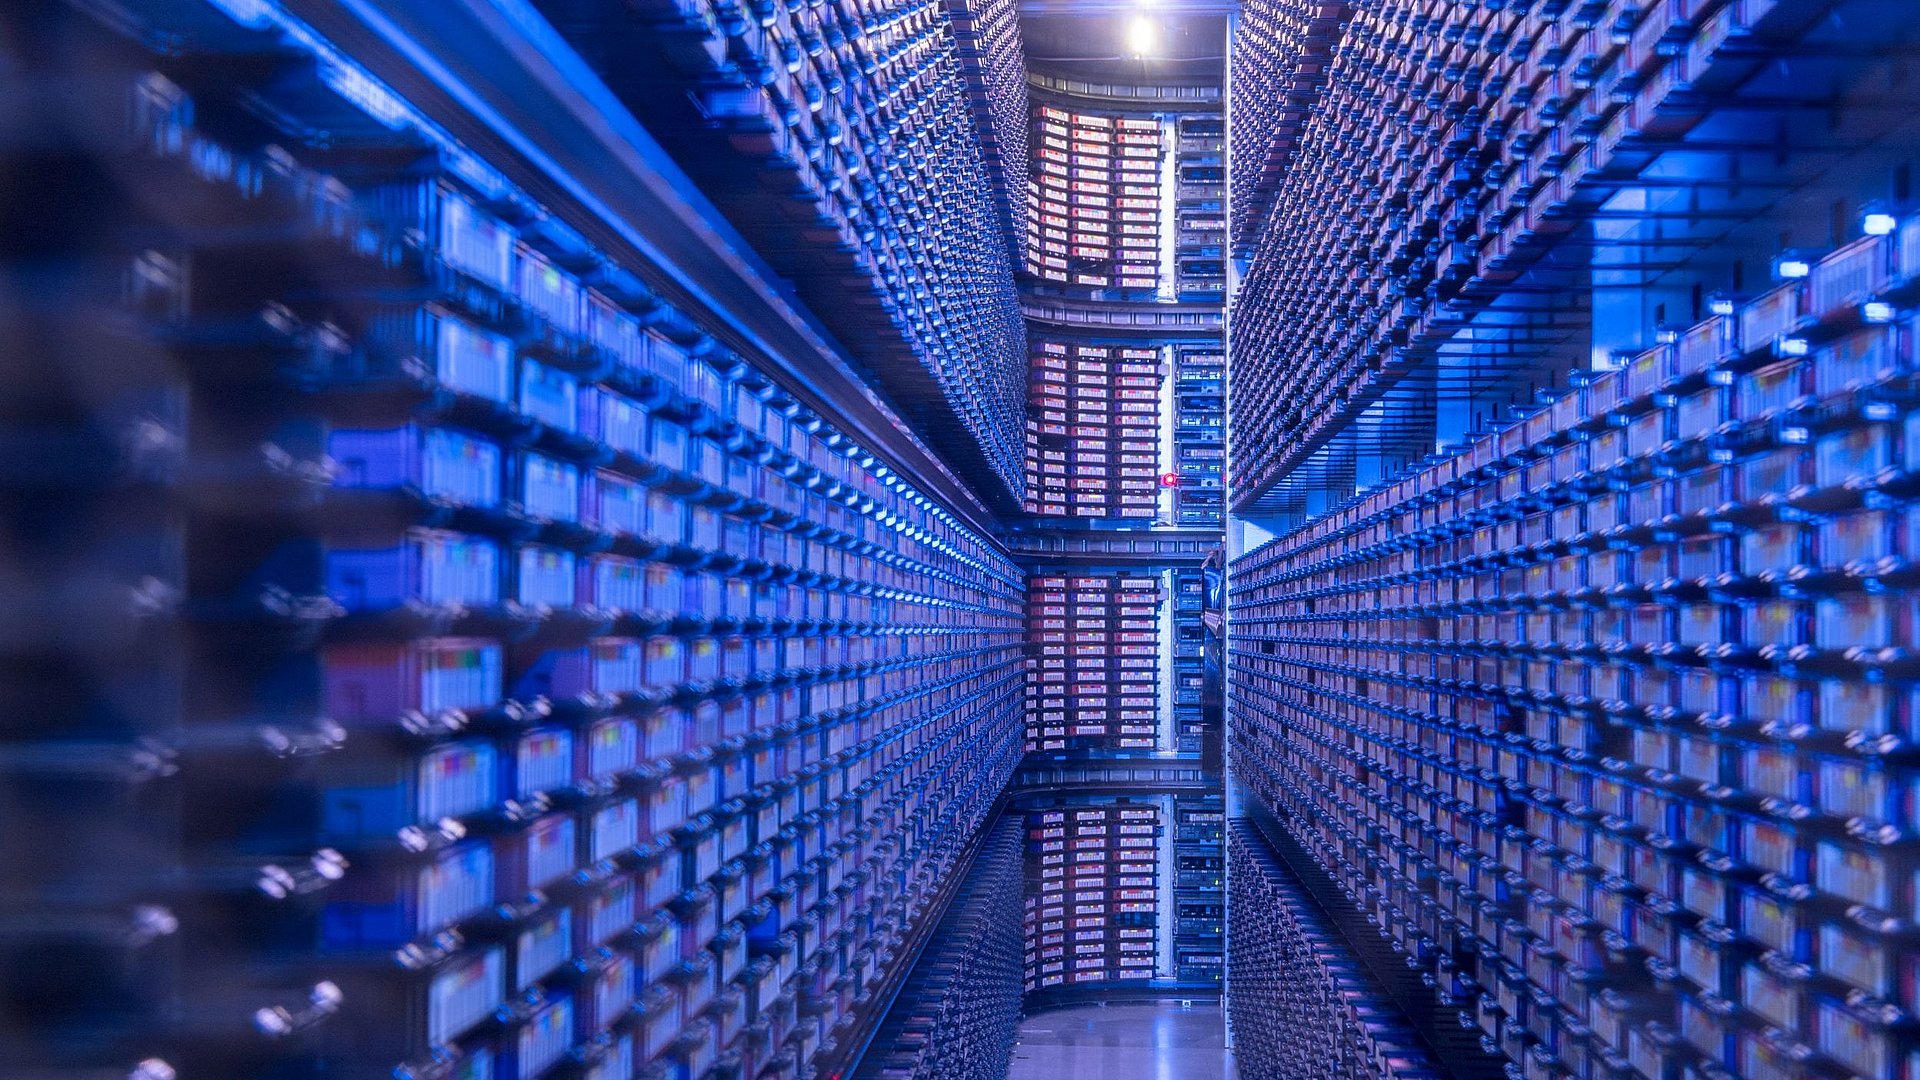 The Data Science Storage at the Leibniz Supercomputing Center of the Bavarian Academy of Sciences and Humanities 